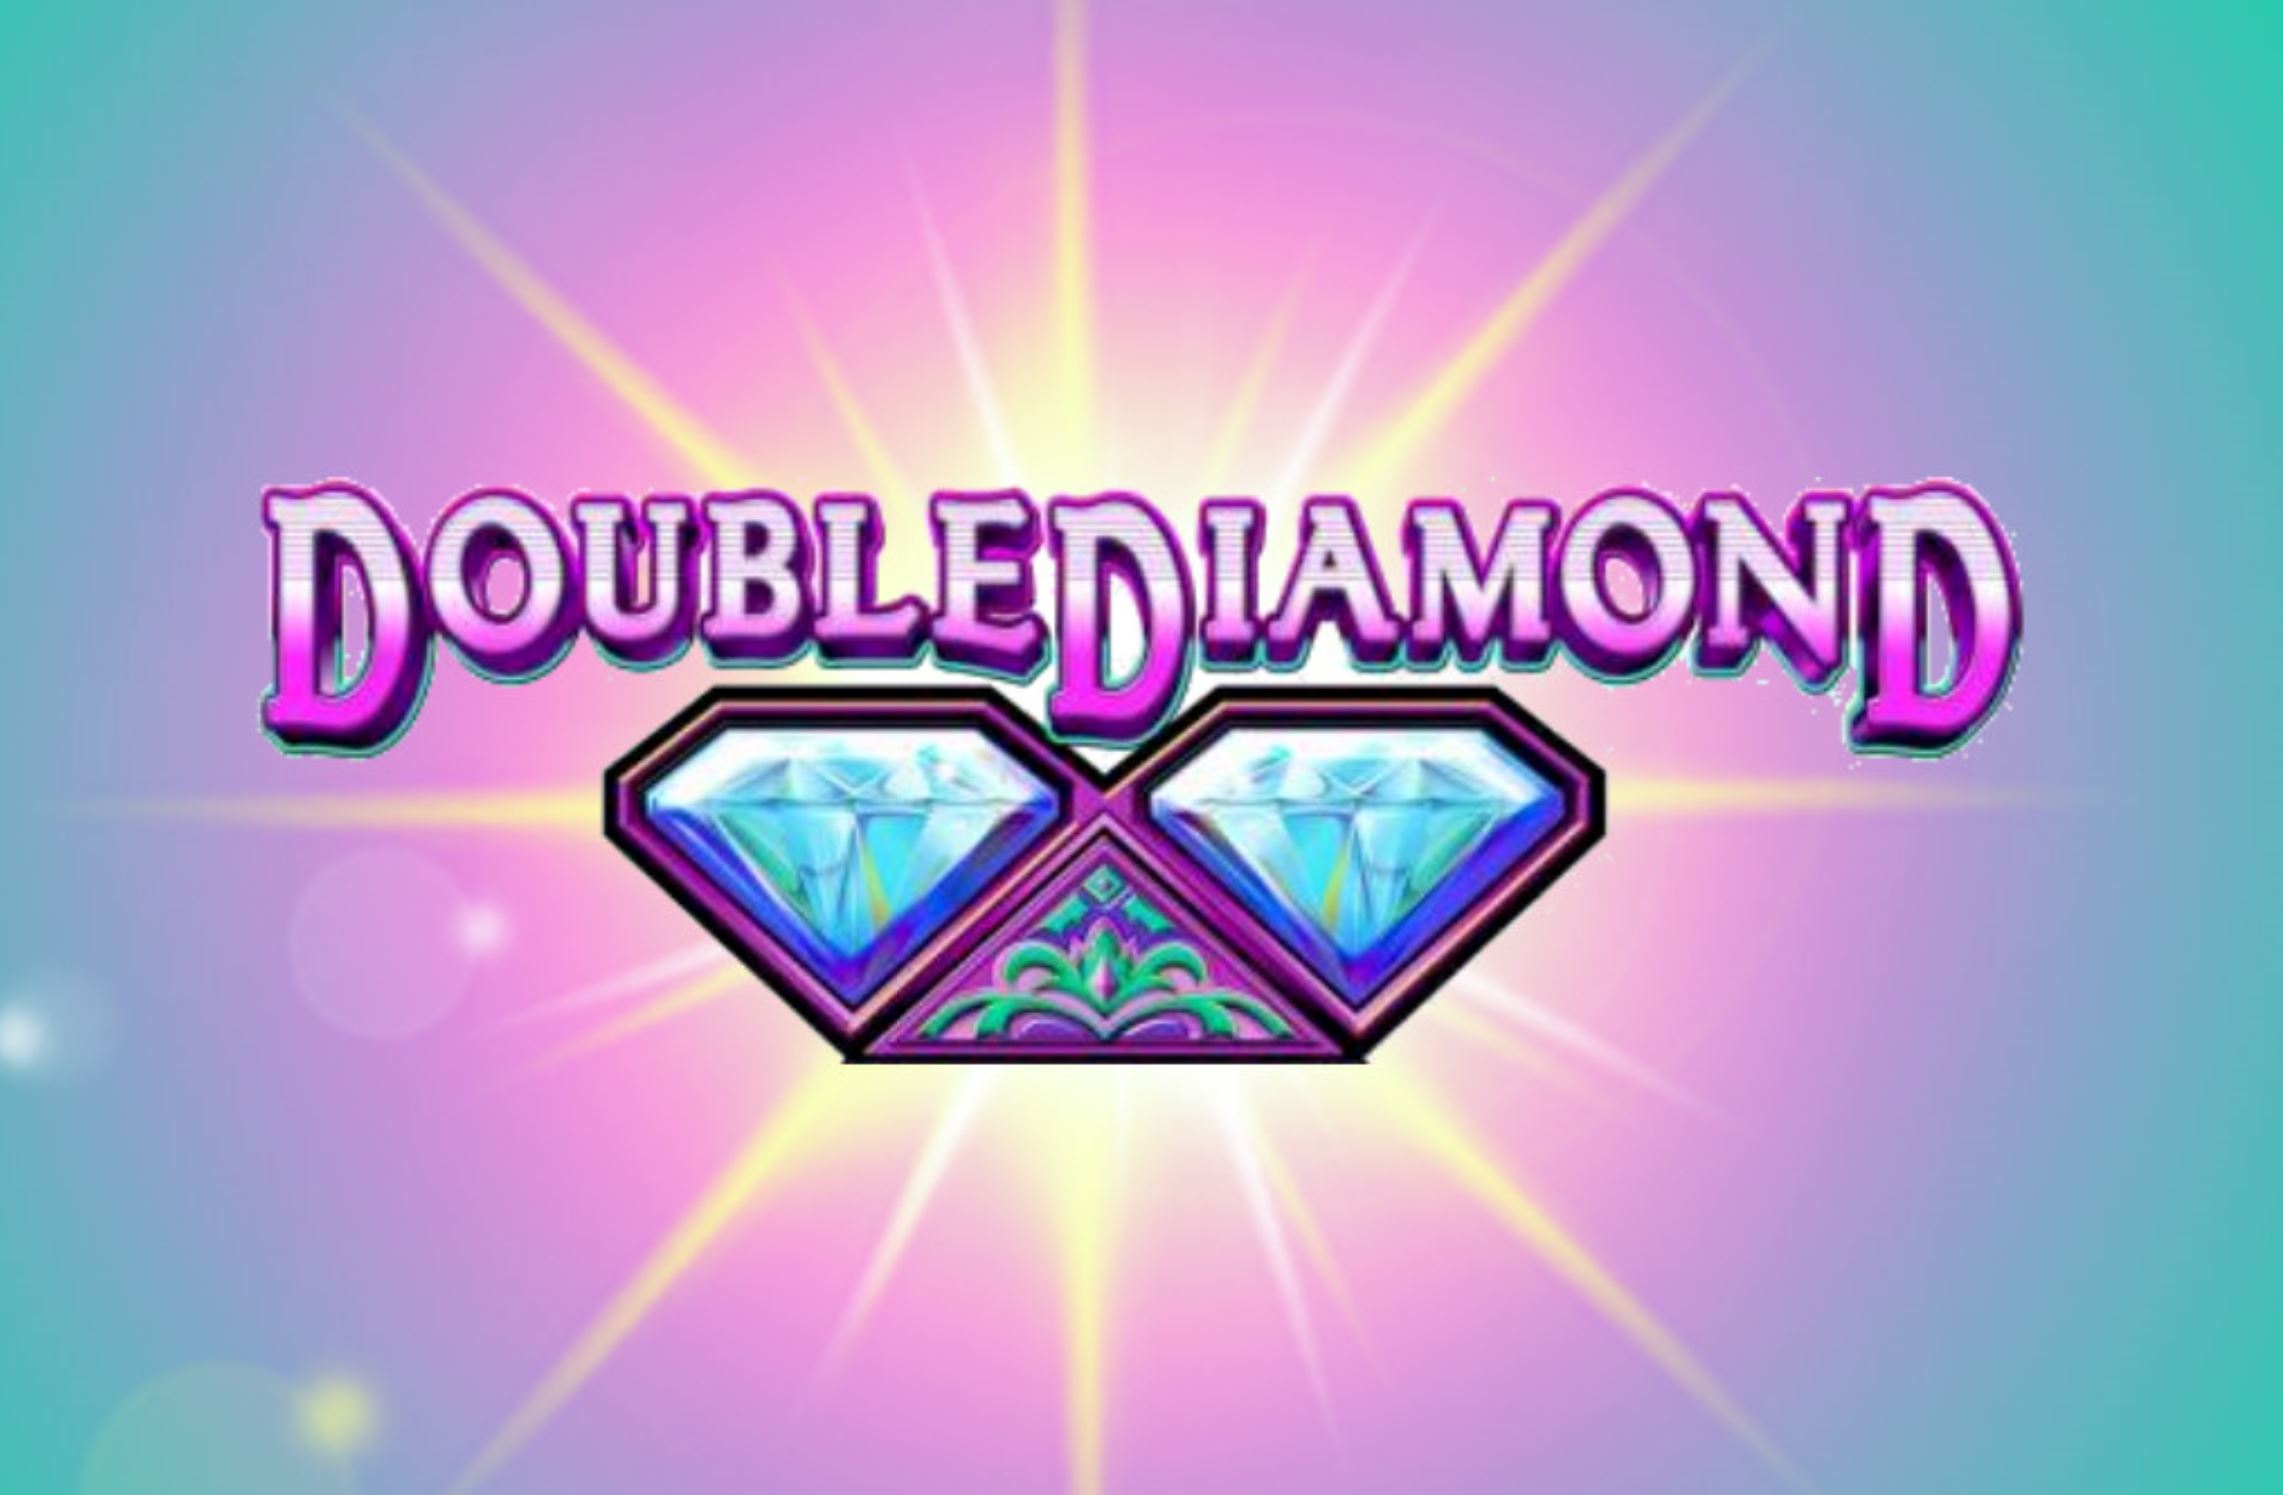 Play Double Diamond Slots and Earn Cash From It